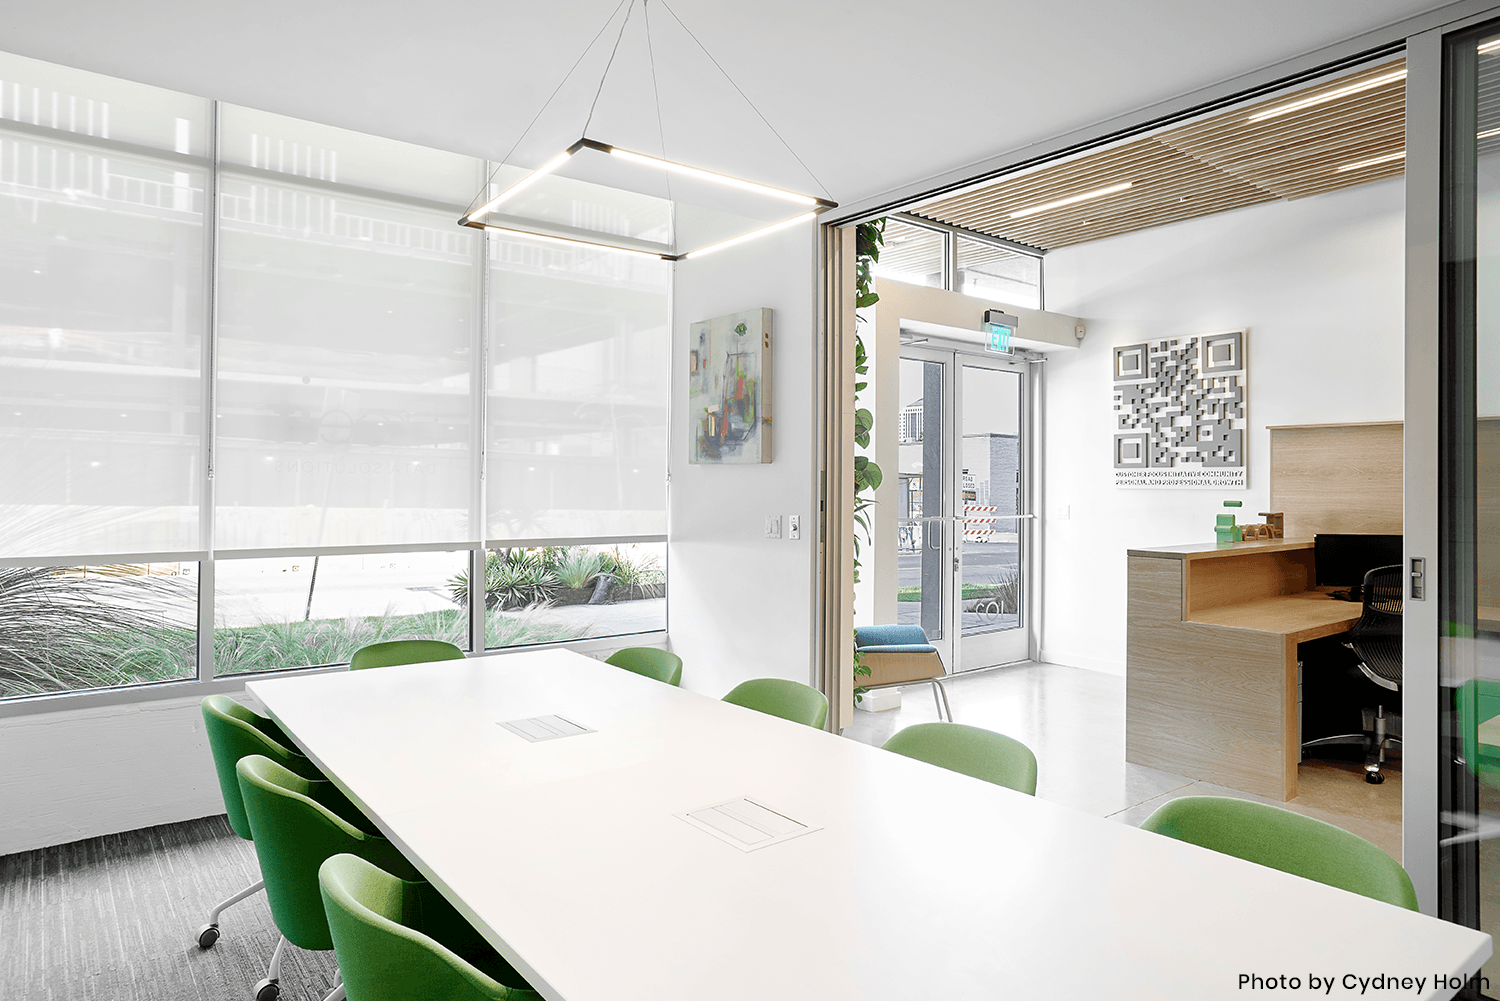 THIN Primaries Square Geometrical Light Fixture at FreeIt Data Solutions Conference Room